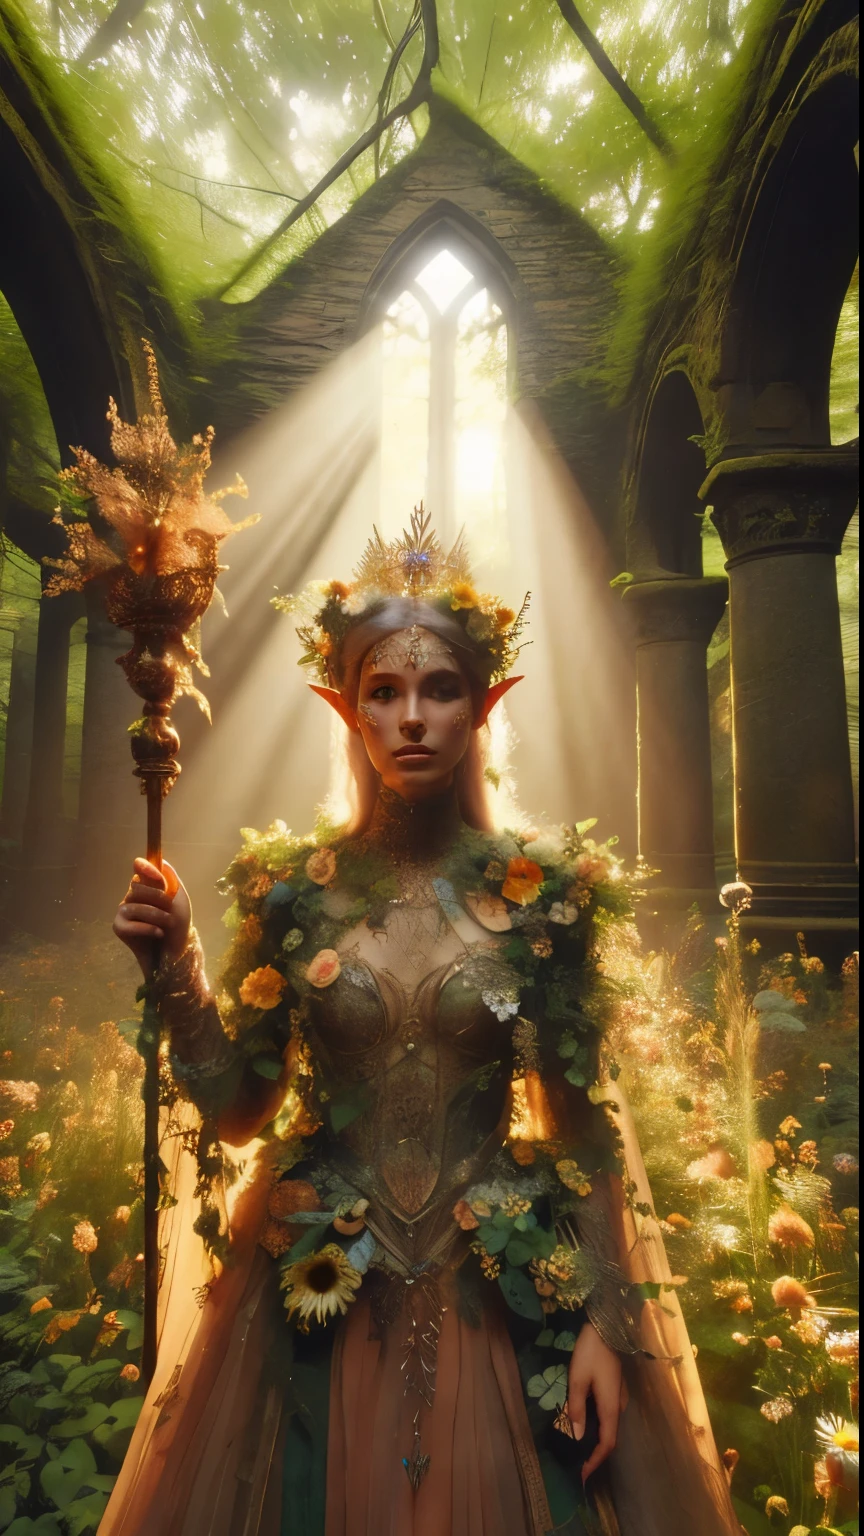 In a dappled, ancient forest ruin, an Elf Princess stands tall close to camera, closeup shot, her scepter raised high as beams of warm sunlight filter through the trees, casting a golden halo around her regal figure. covered in an ultra-multitude of tiny flowers and vines, very tall overgrown varied wildflower beds surround her, Her beautiful, enchanted clothing shimmers in the soft light, while lush foliage and vines surround her, creating a lush environment. The camera captures a sharp focus on the princess's face, with the rule of thirds composition placing her at the intersection of two diagonals. Shot during the golden hour, the scene exudes an ethereal mood, inviting the viewer to step into this mystical realm., ,fantasy, better_hands, leonardo, angelawhite, Enhance